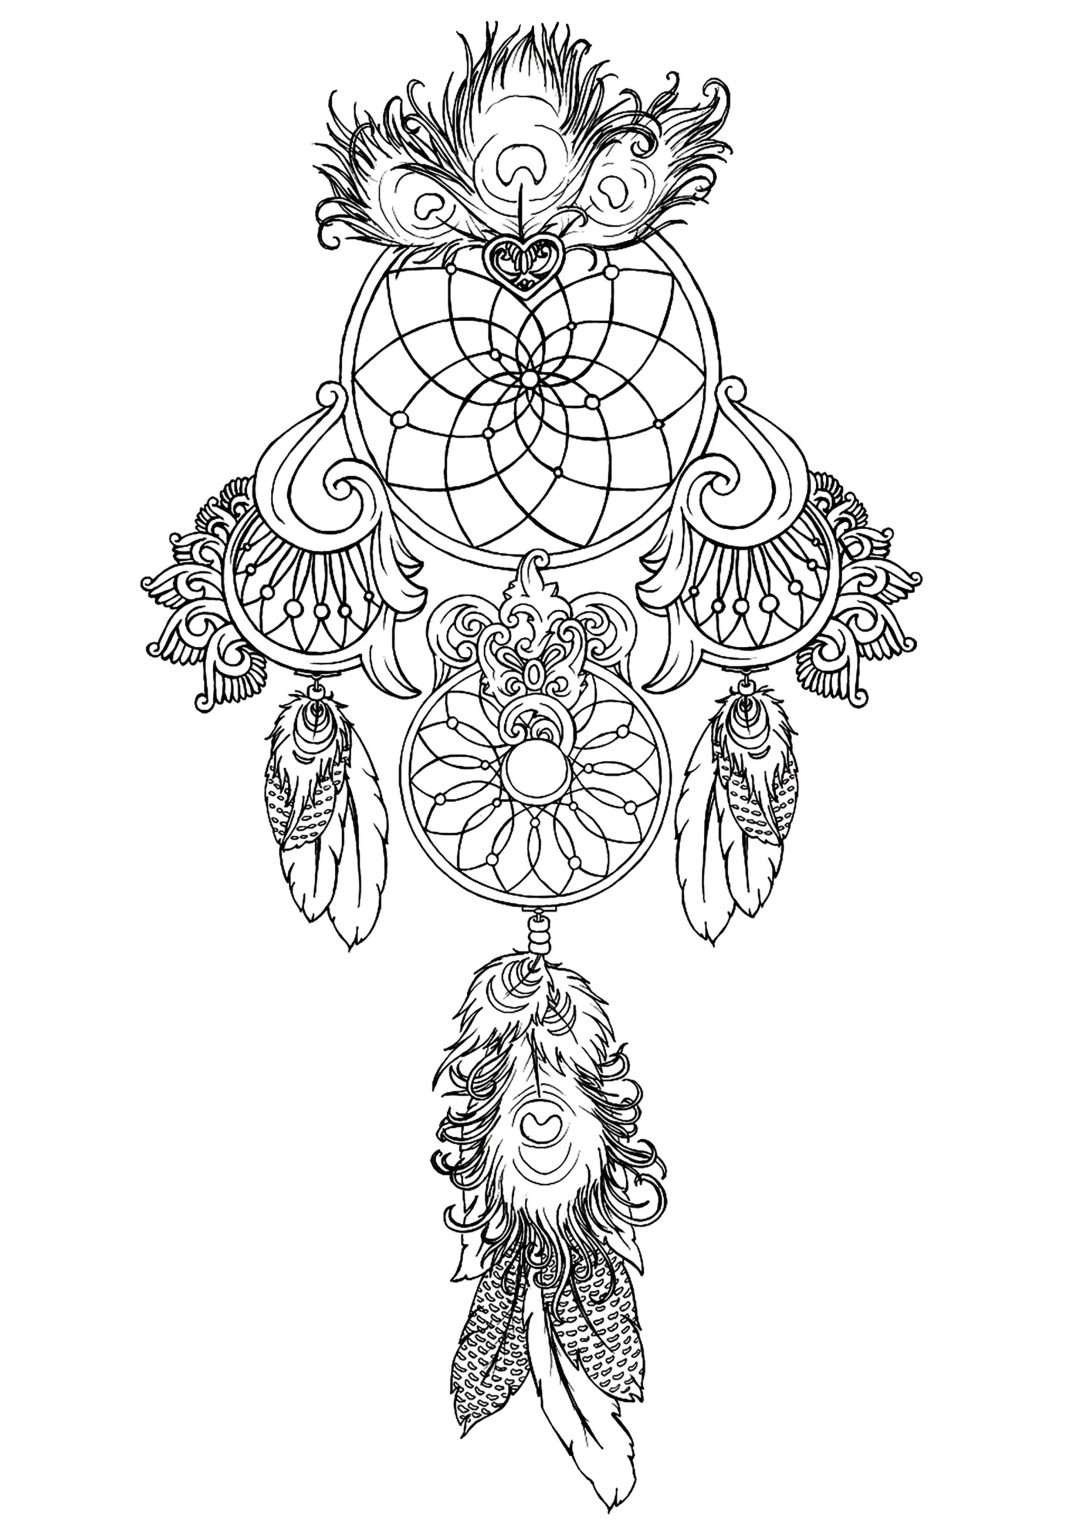 Online Coloring Books For Adults
 Free line Coloring Pages for Adults Creatively Crafting